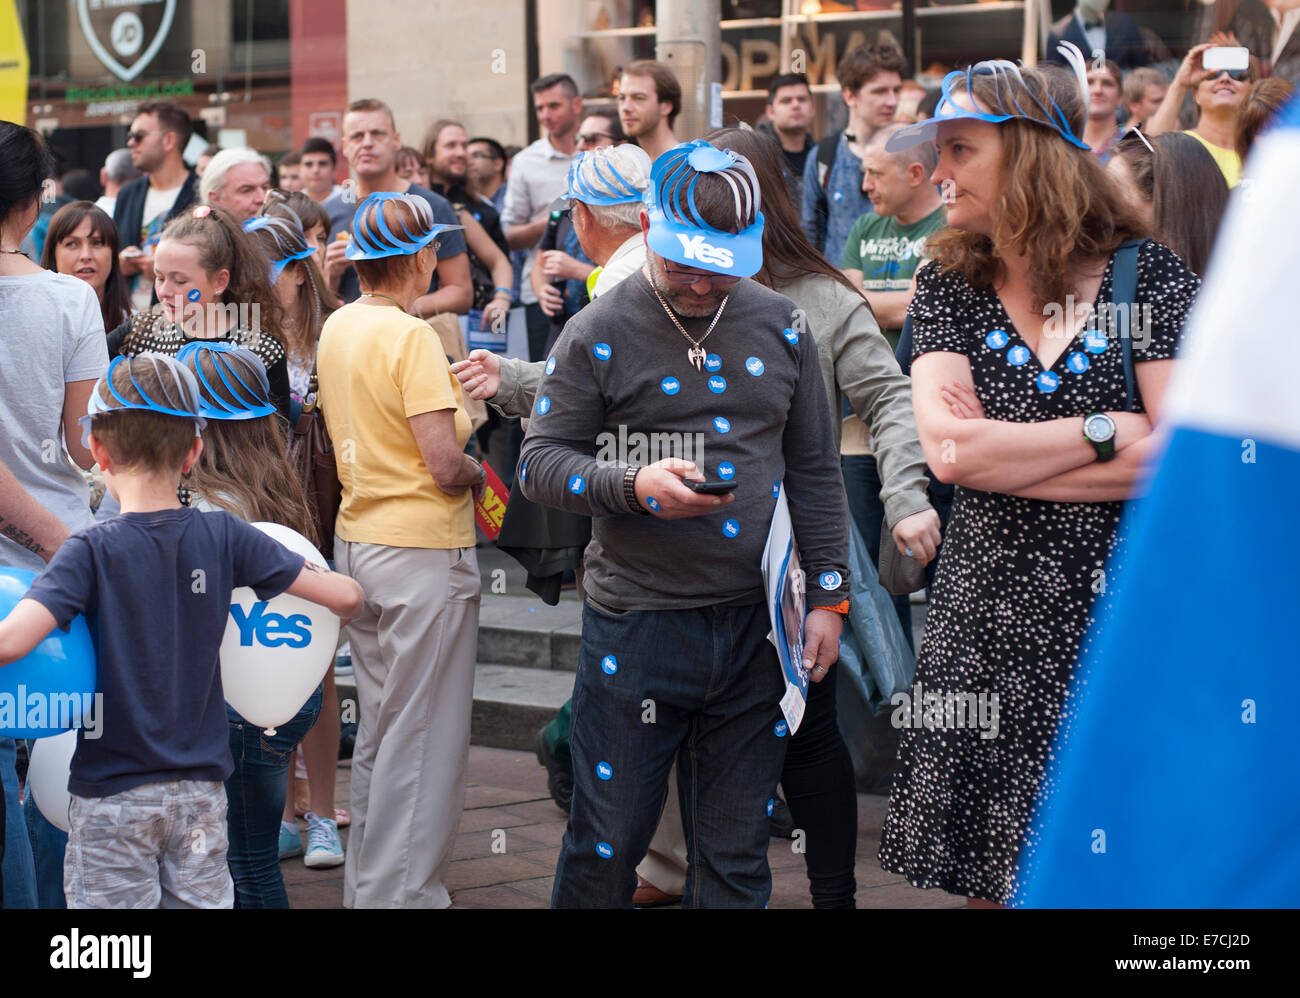 Glasgow, Scotland, UK. 13th September, 2014. Yes supporters covered in stickers and wearing hats during the lead up to the Scottish independence referendum on Buchanan Street, Glasgow, Scotland on Saturday 13th September 2014 Credit:  Iona Shepherd/Alamy Live News Stock Photo